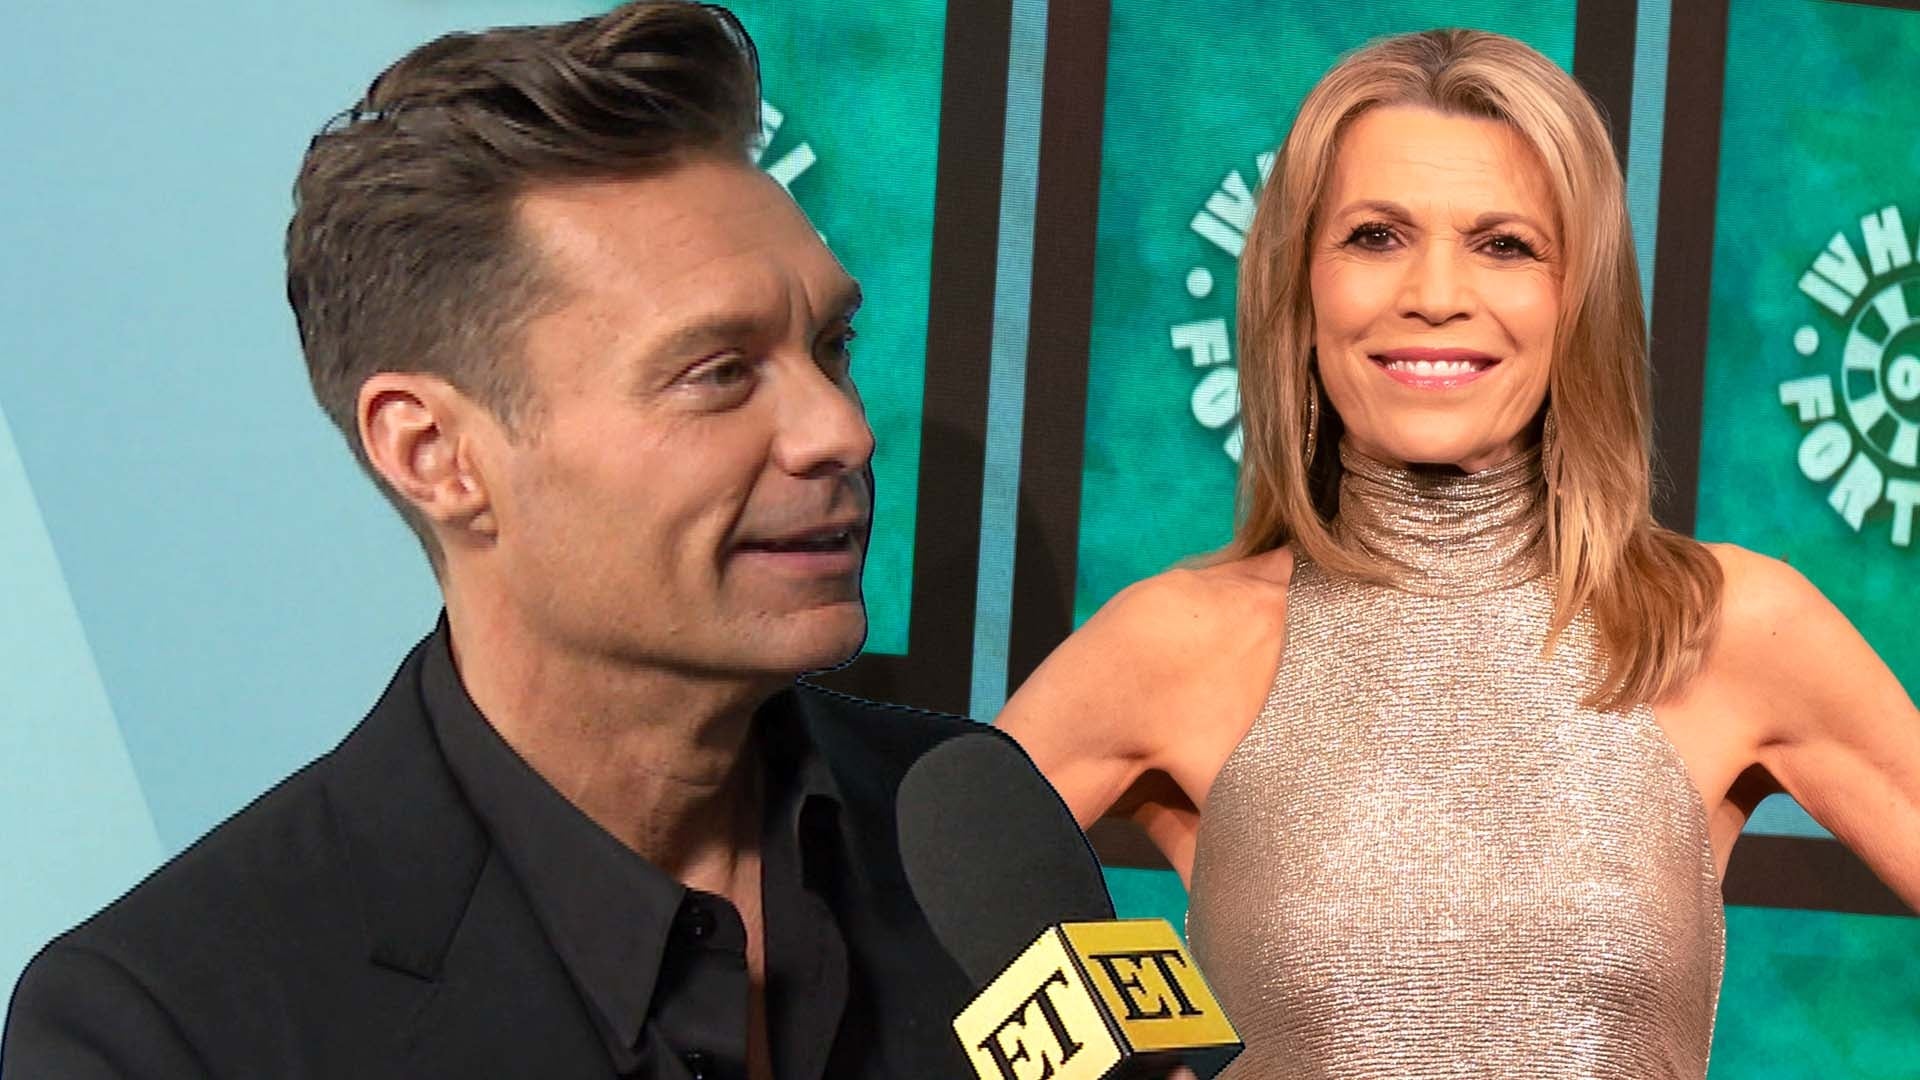 Ryan Seacrest Reveals What He's Learned About 'Wheel of Fortune' Co-Host Vanna White (Exclusive)